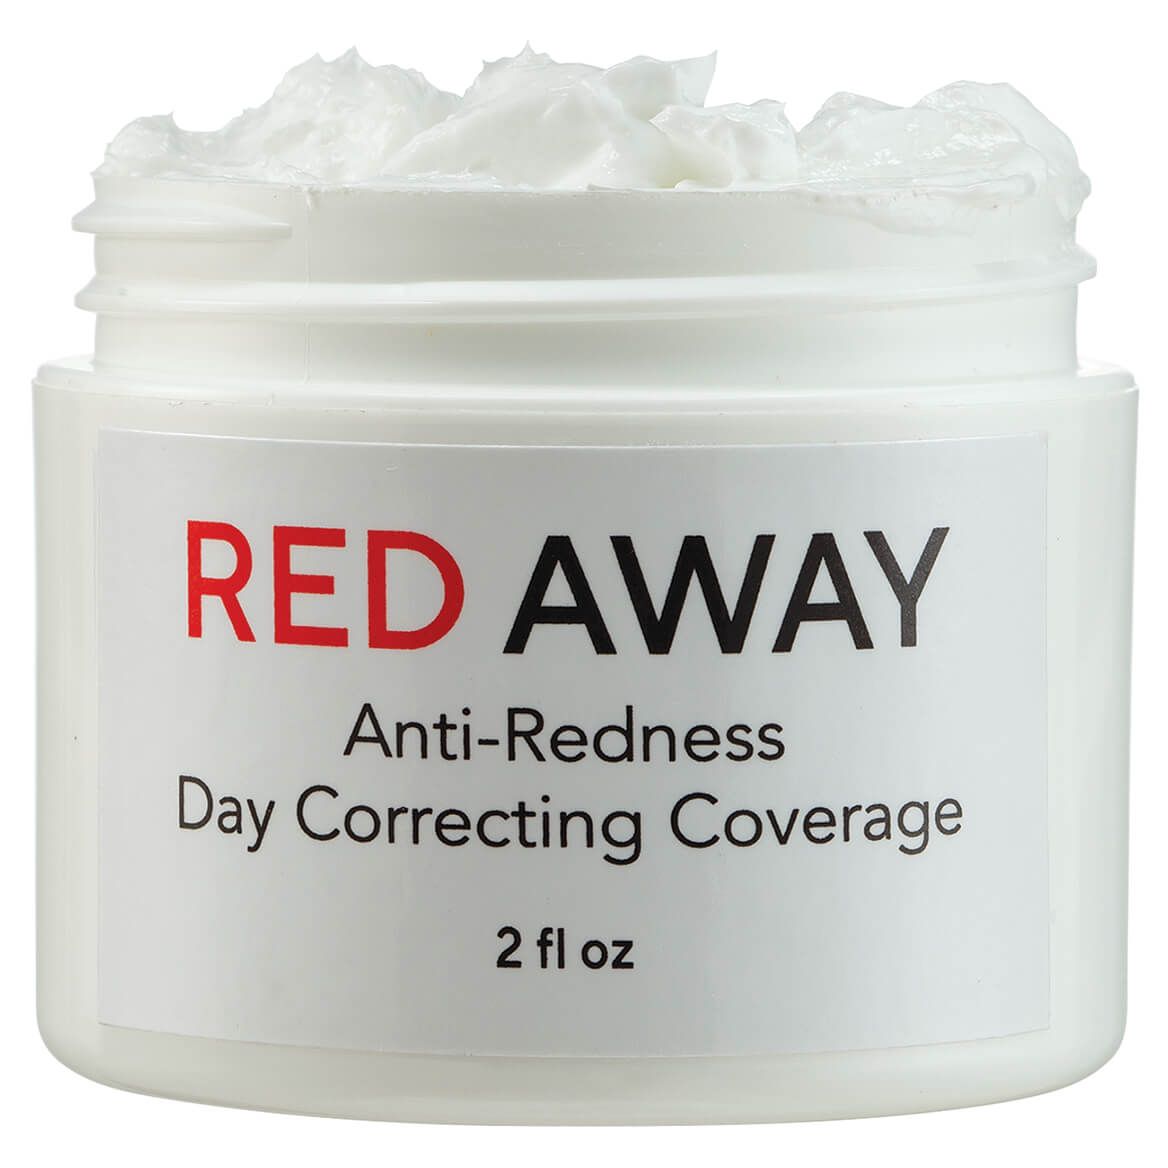 Red Away Anti-Redness Day Correcting Coverage + '-' + 375120